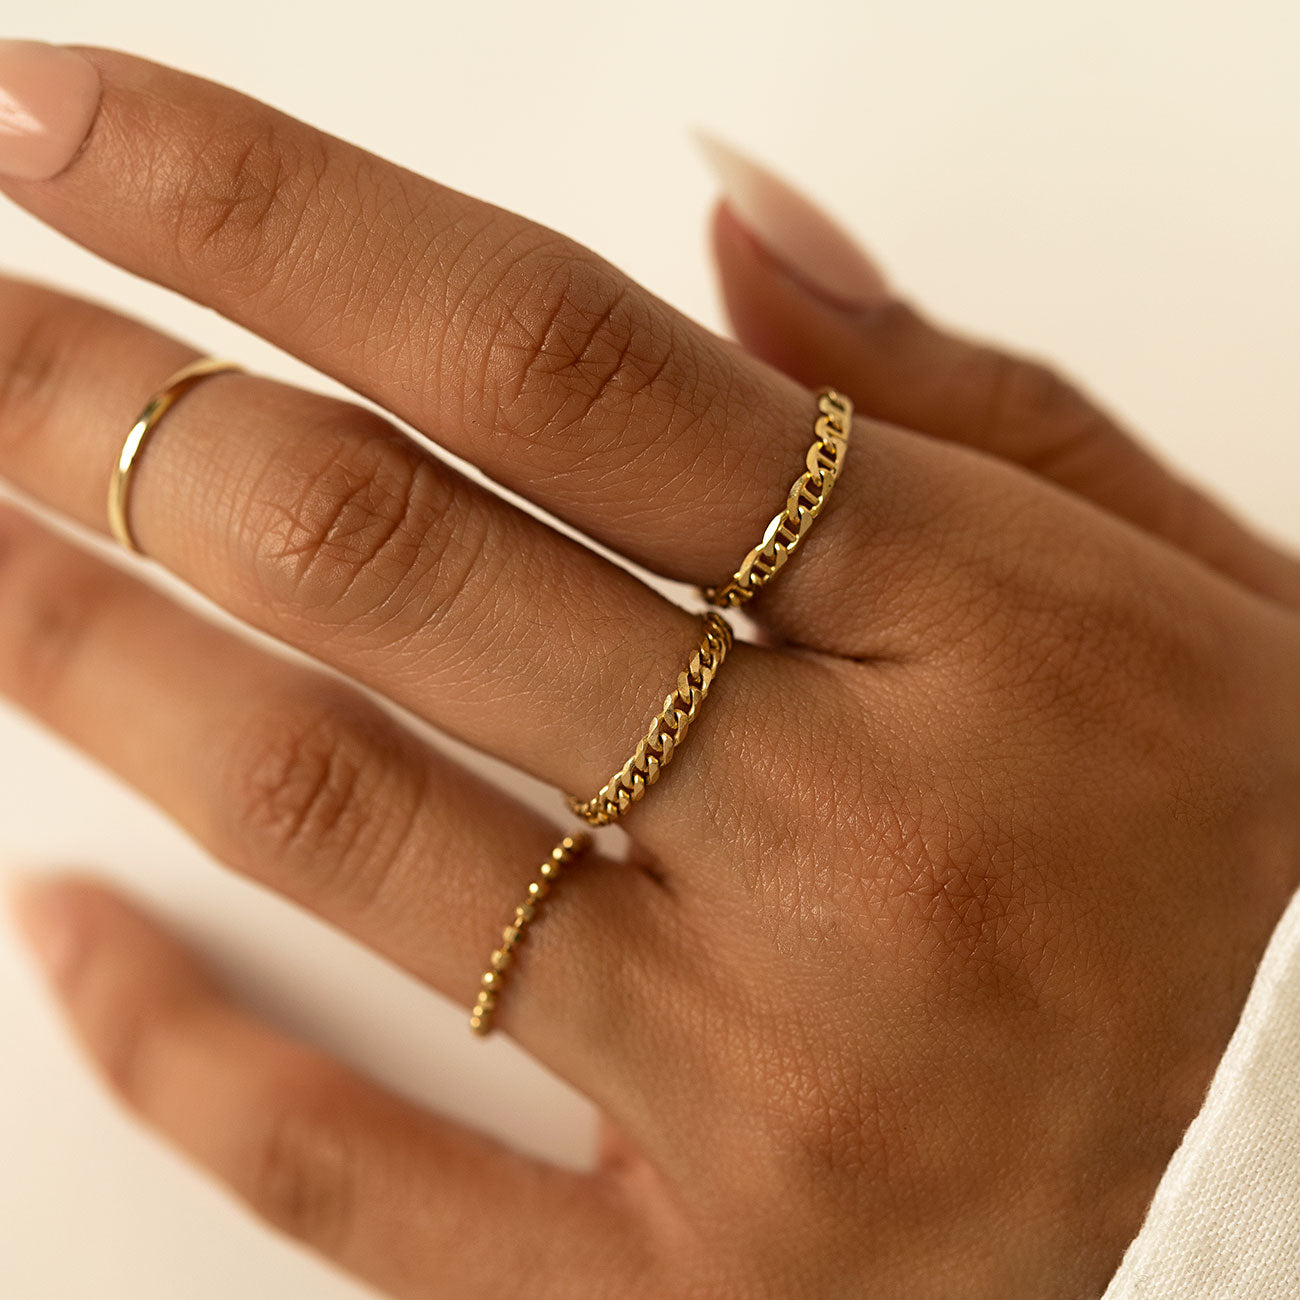 Chain Rings Gold, Solid-Gold Rings, Dainty Ring, Delicate Ring 14K Gold / 9 / White Sapphire